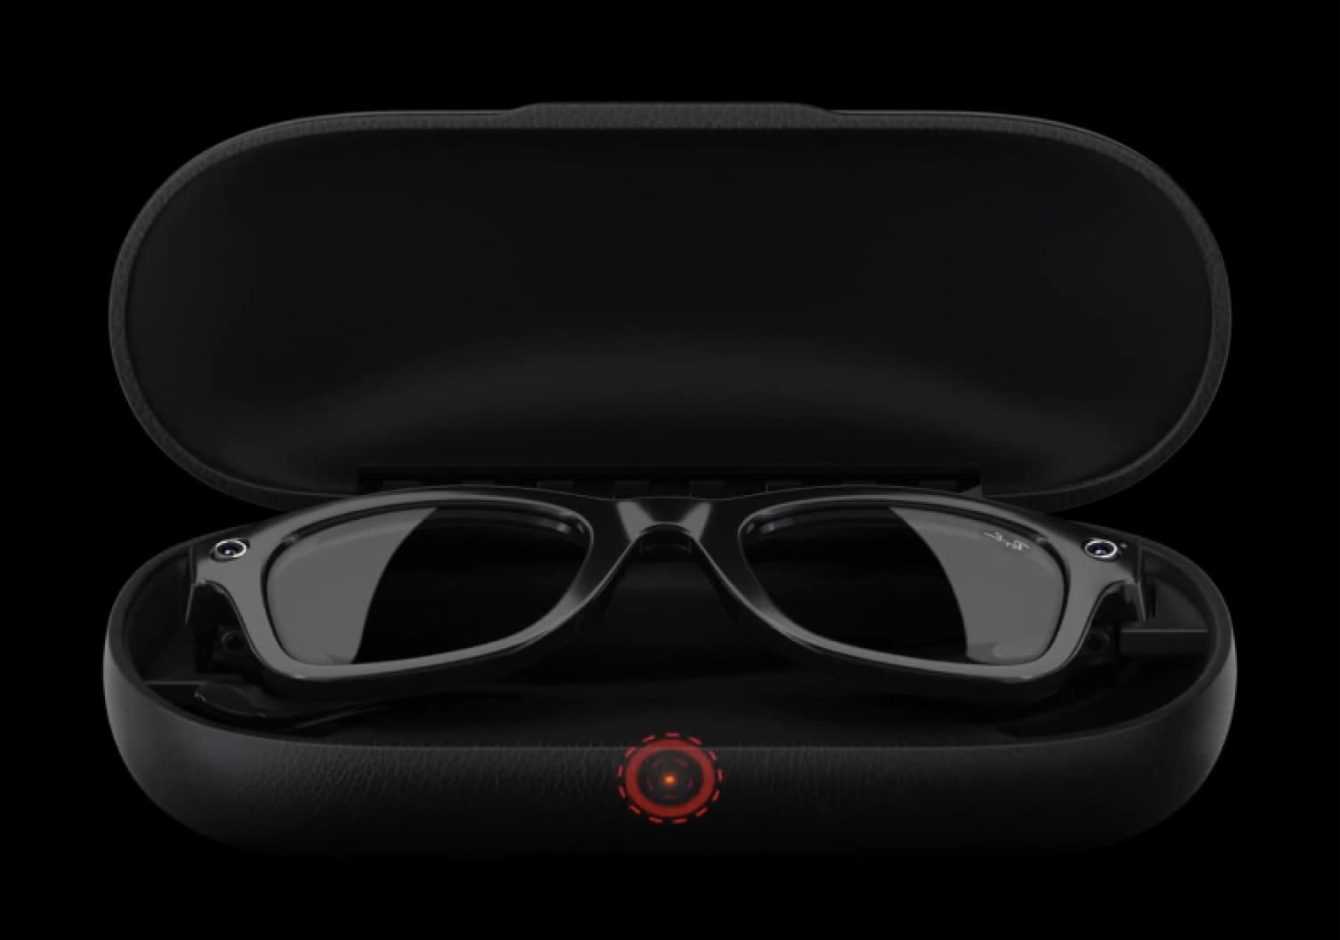 Ray-Ban Stories smart glasses: new features and support for Meta accounts